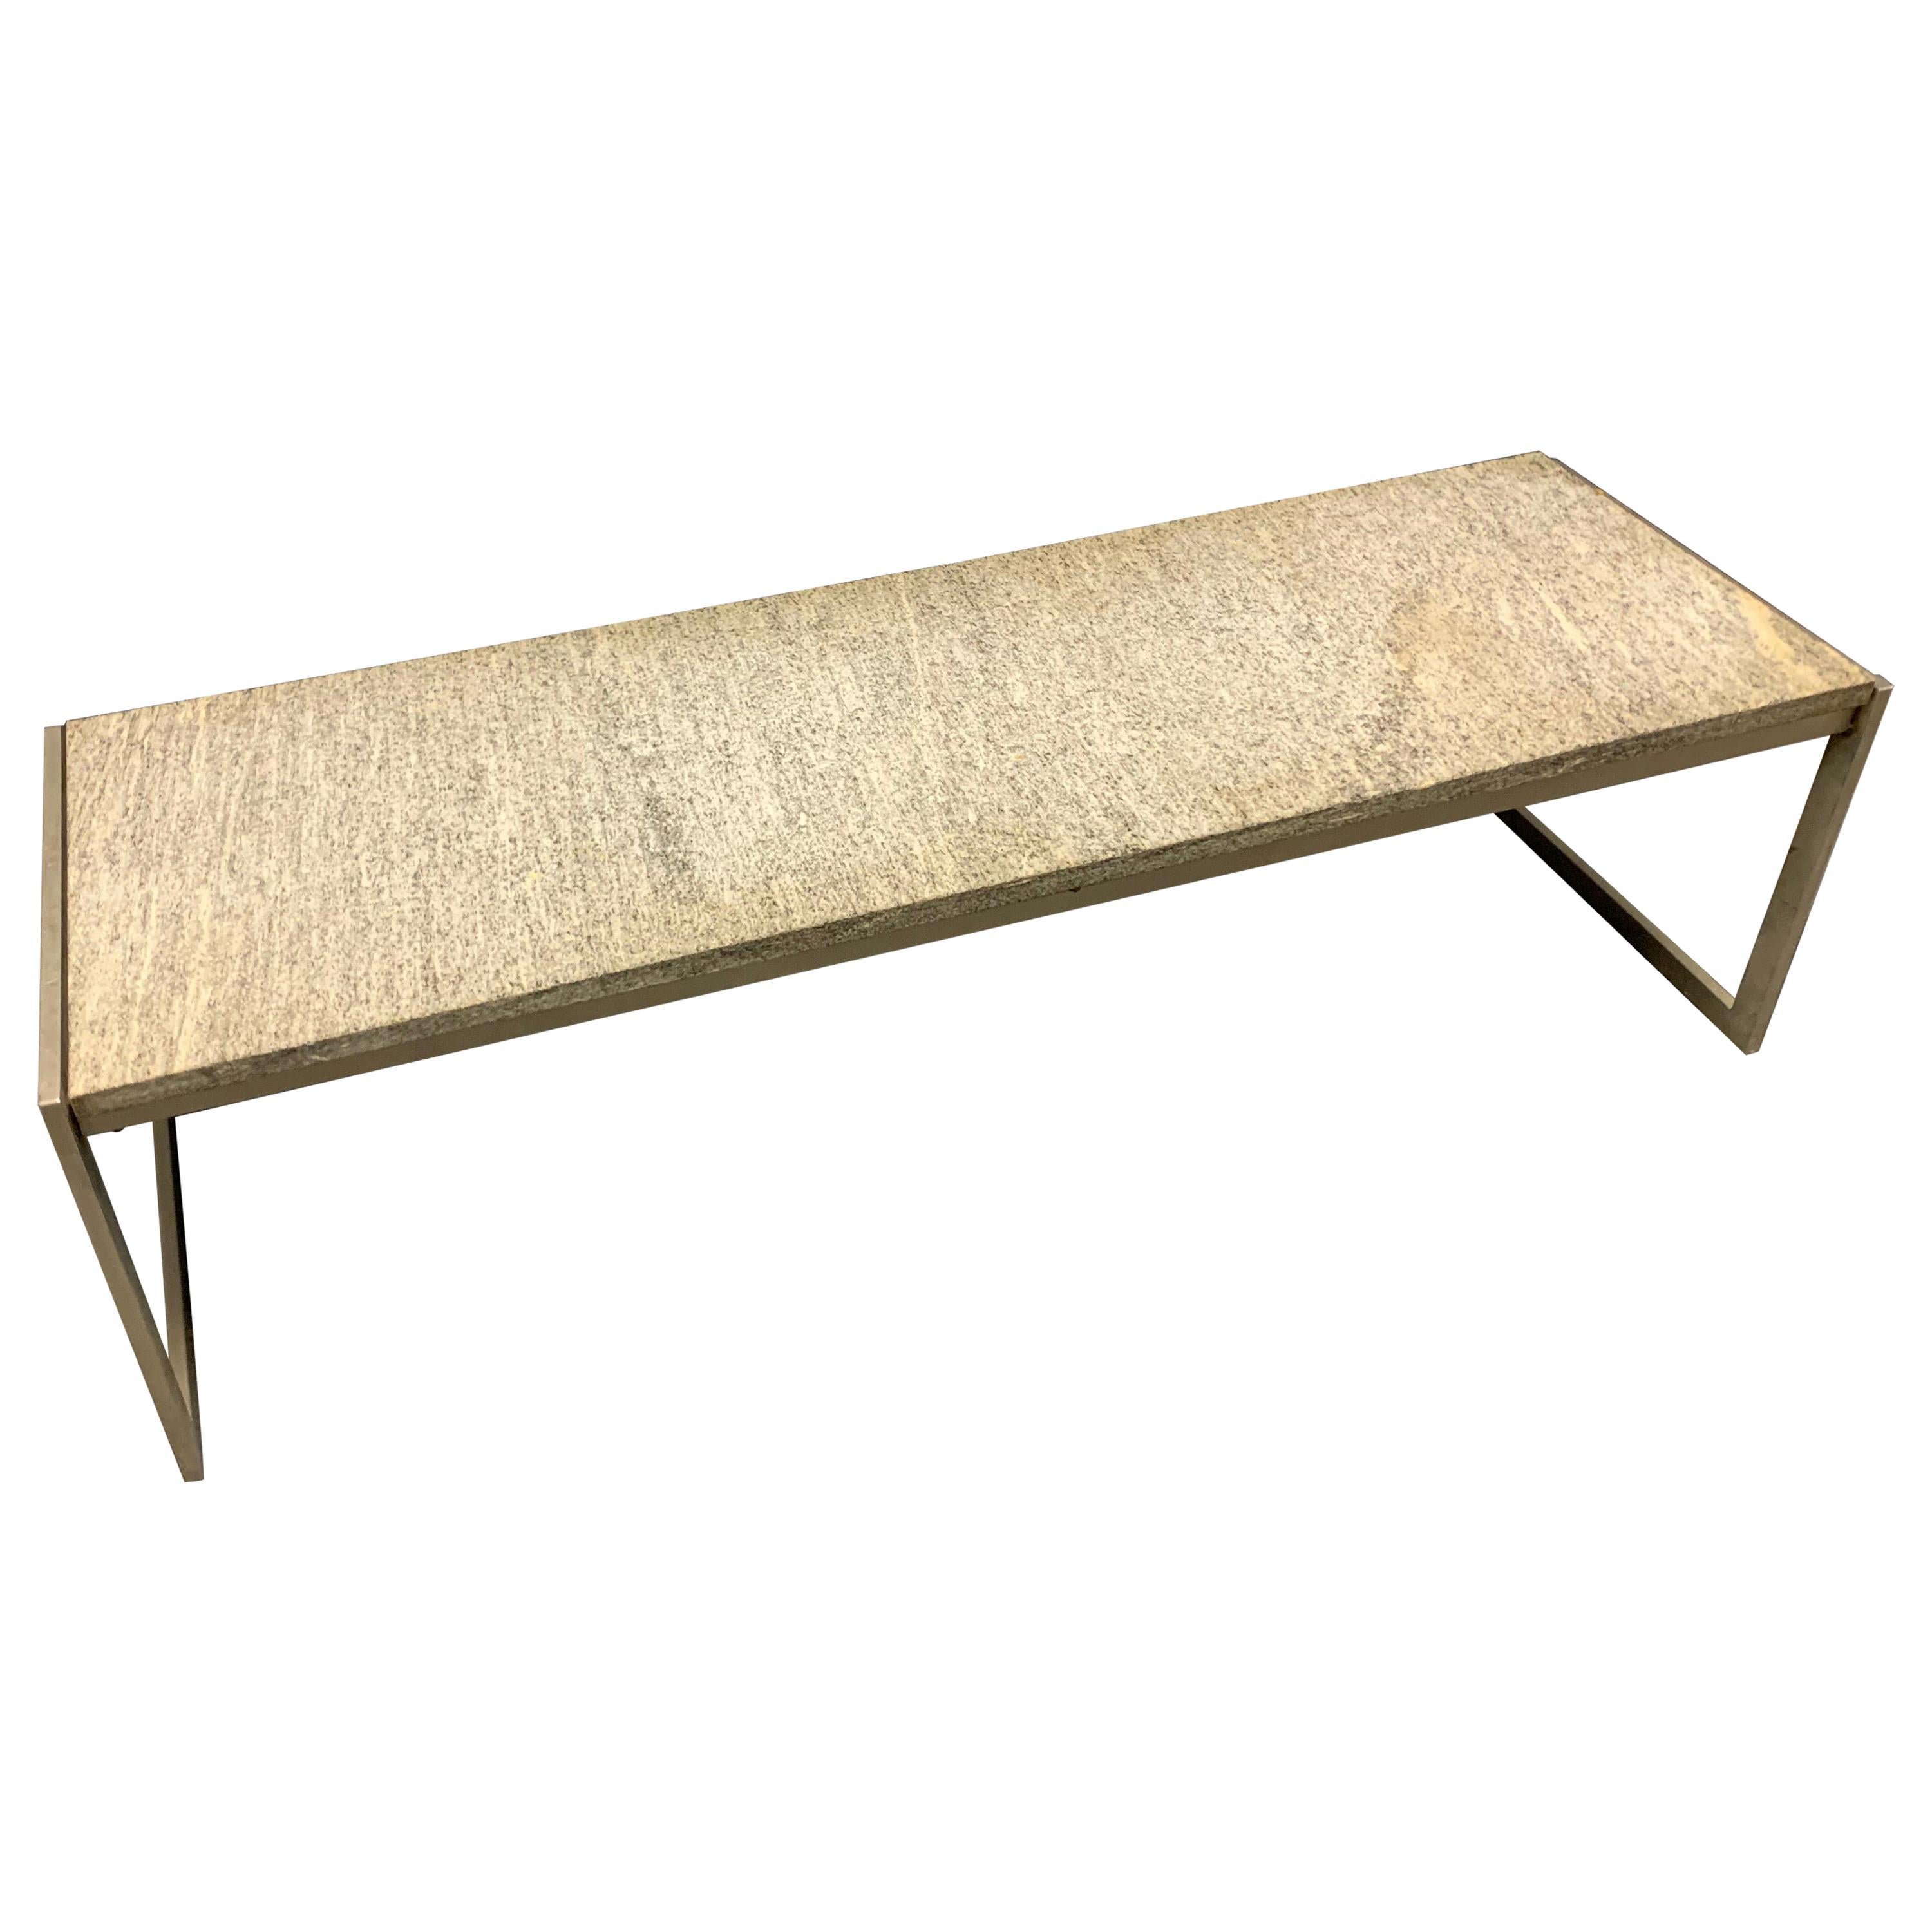 Outstanding Flint Rolled Marble Coffee Table or Bench For Sale